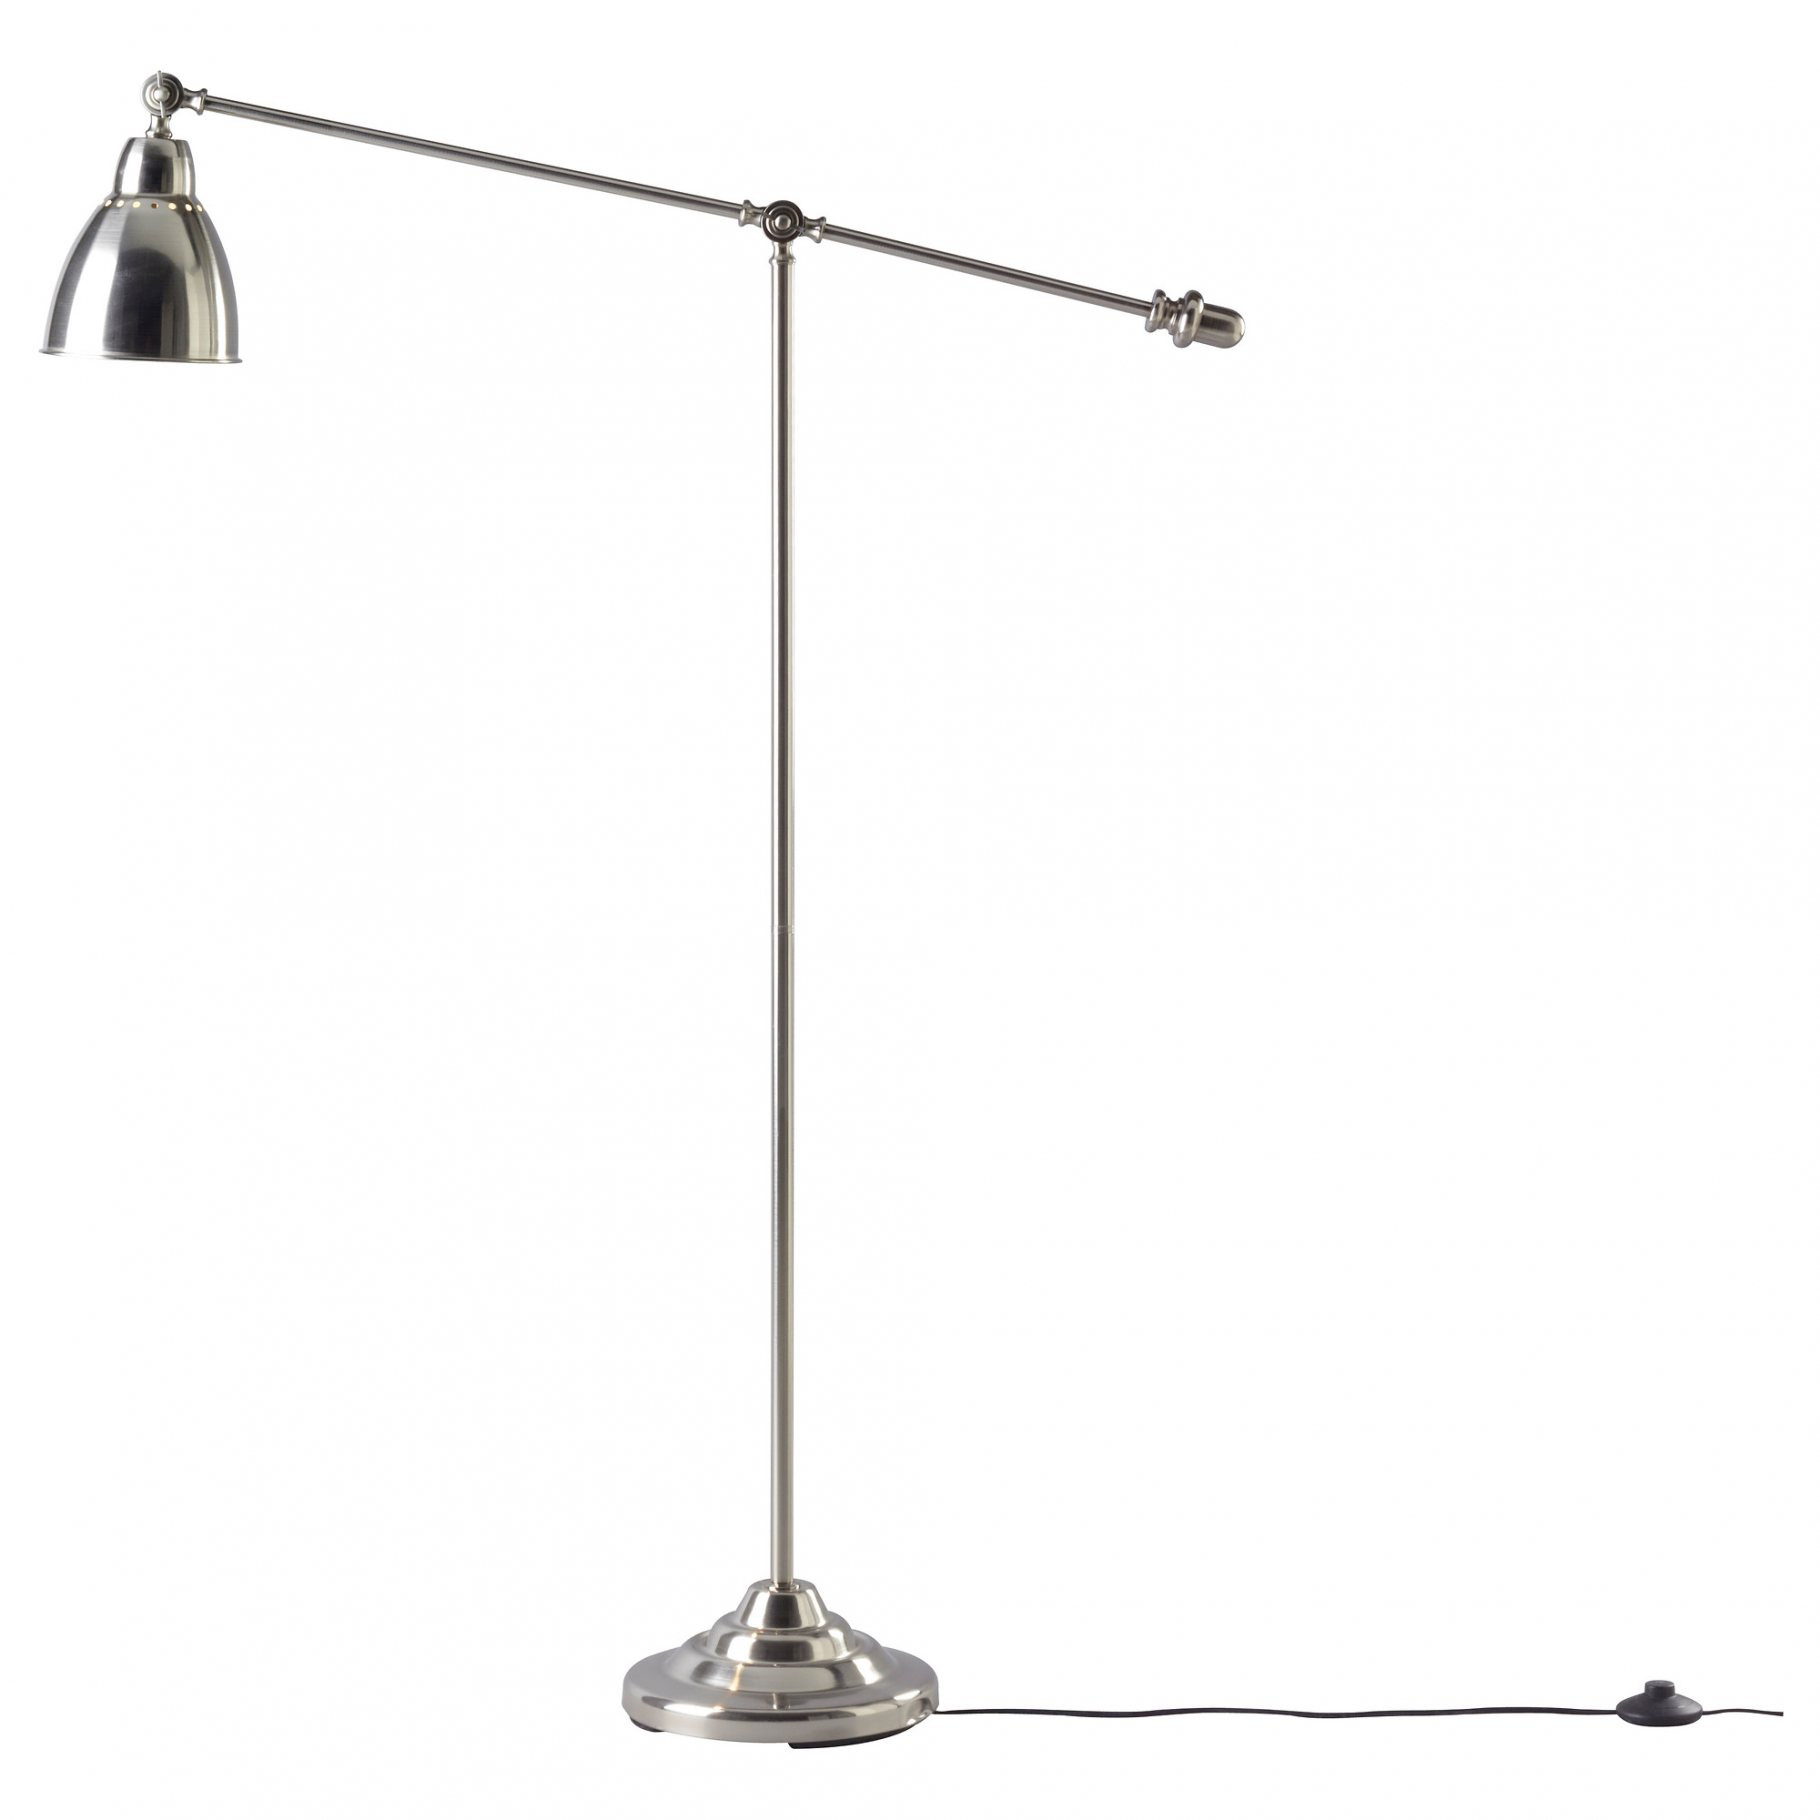 Attractive Reading Floor Lamp Adjustable Awesome Lerstum throughout sizing 1820 X 1820